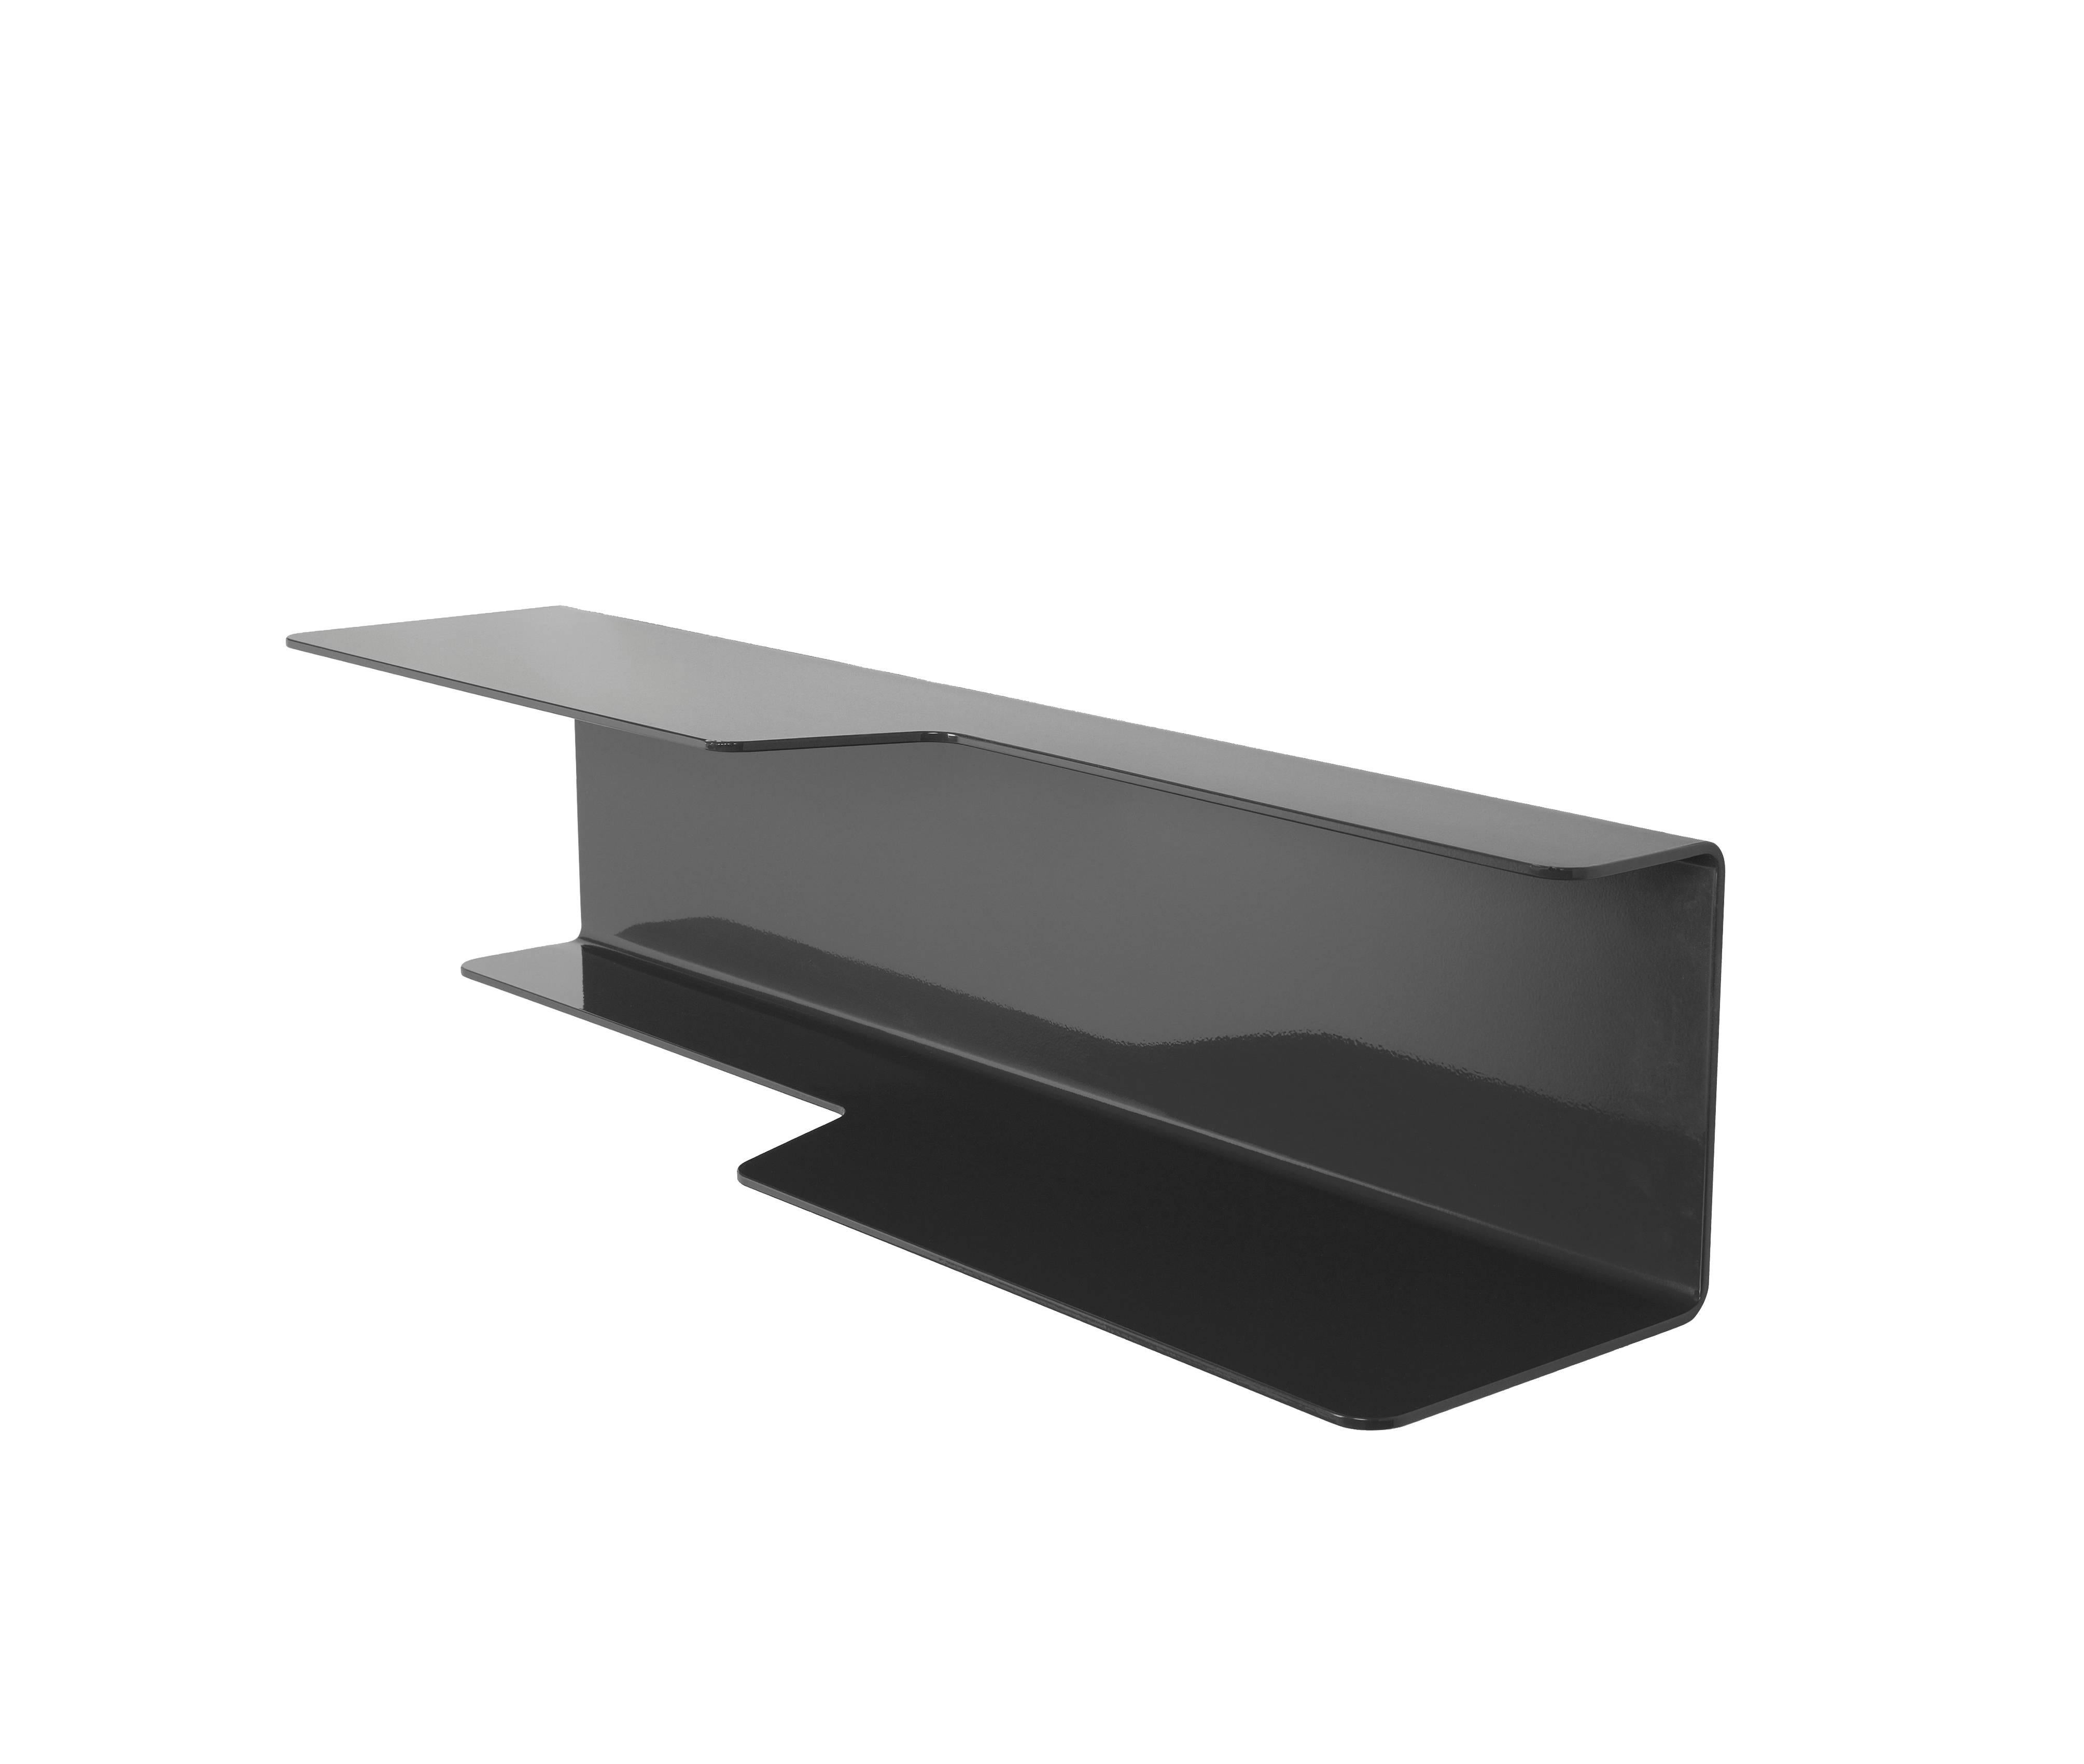 The wall-mounted, tidal shelf is formed out of 1/4 inch thick, powder-coated aluminum. Each shelf has a welded U-channel to the reverse of the shelf and easily mounts on included custom-bent steel Z-clips. The shelf is available in numerous powder